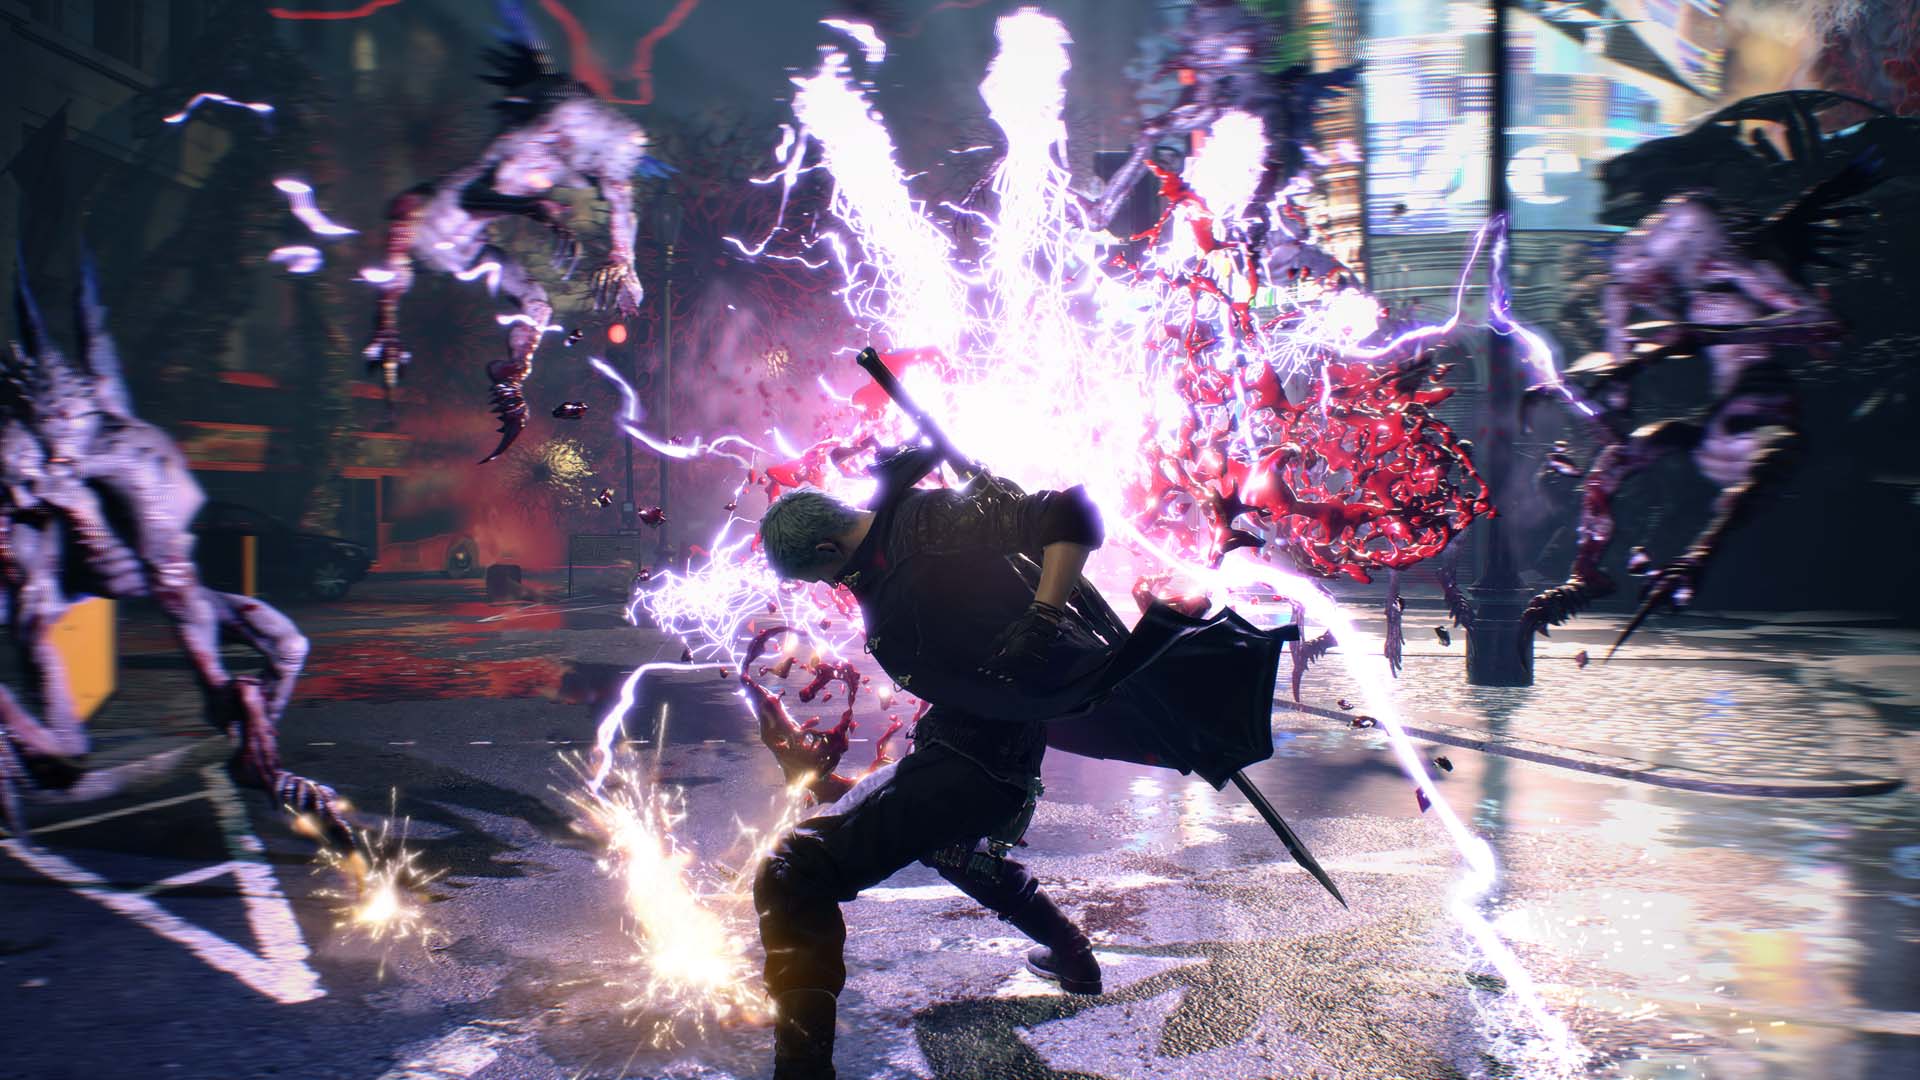 playstation store devil may cry 5